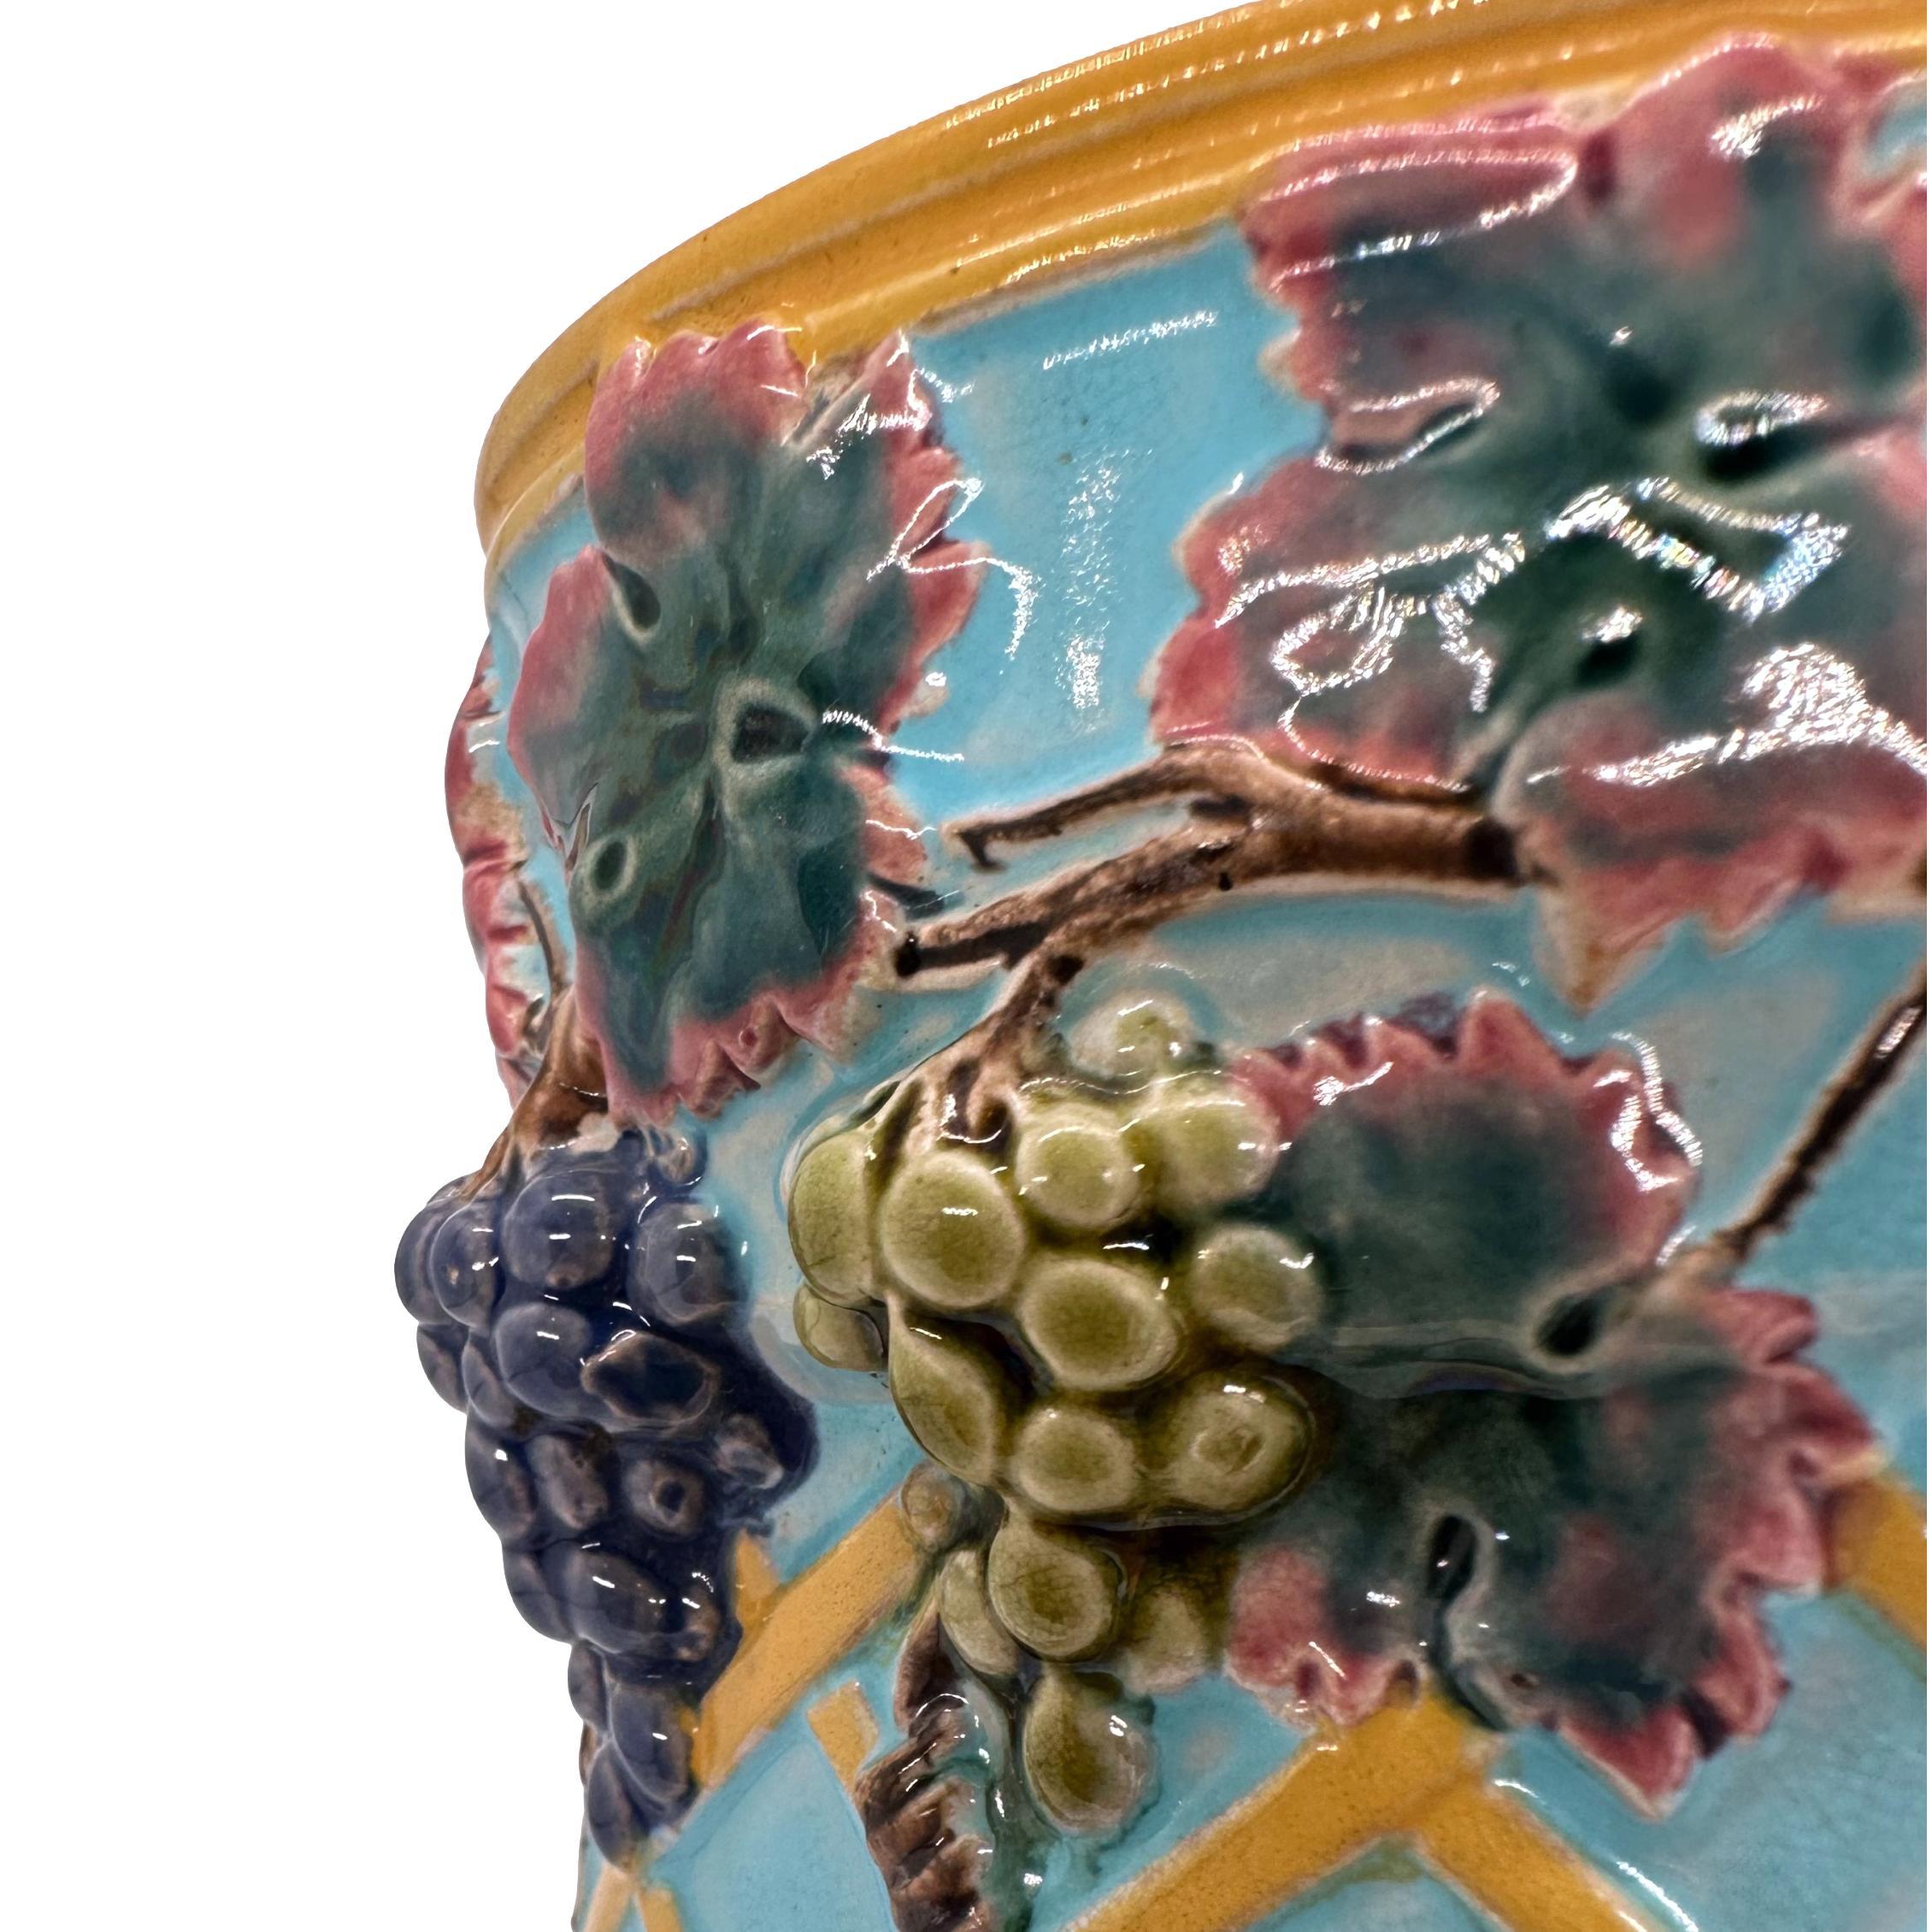 A BWM Majolica Jug Depicting 'The Fox and the Grapers' Aesop's Fable, ca. 1876 For Sale 4